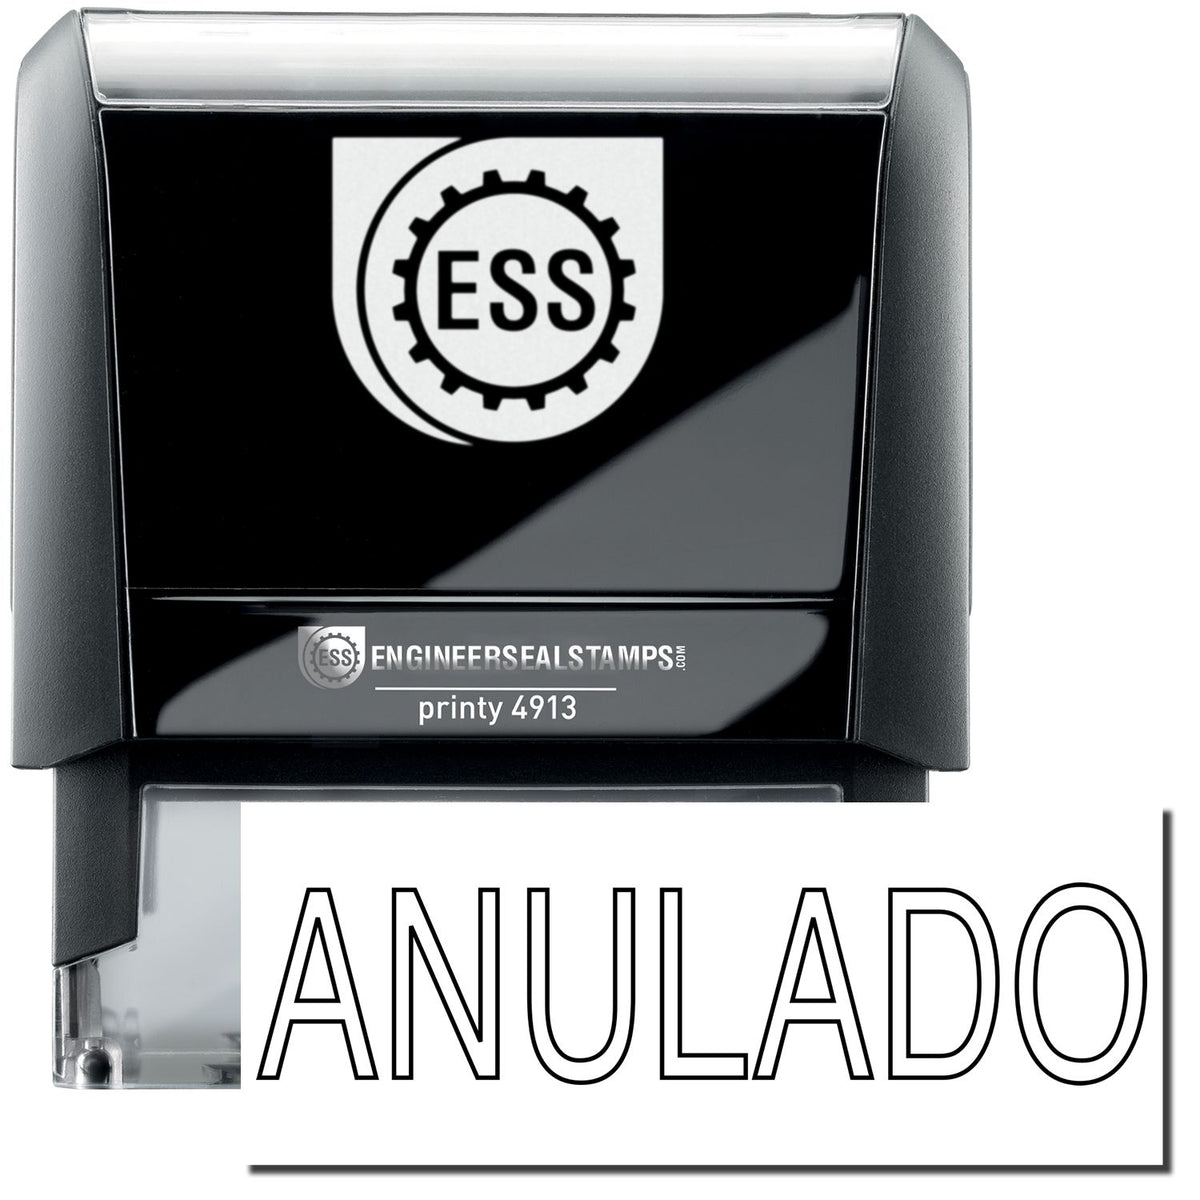 A self-inking stamp with a stamped image showing how the text &quot;ANULADO&quot; in a large outline style is displayed by it after stamping.